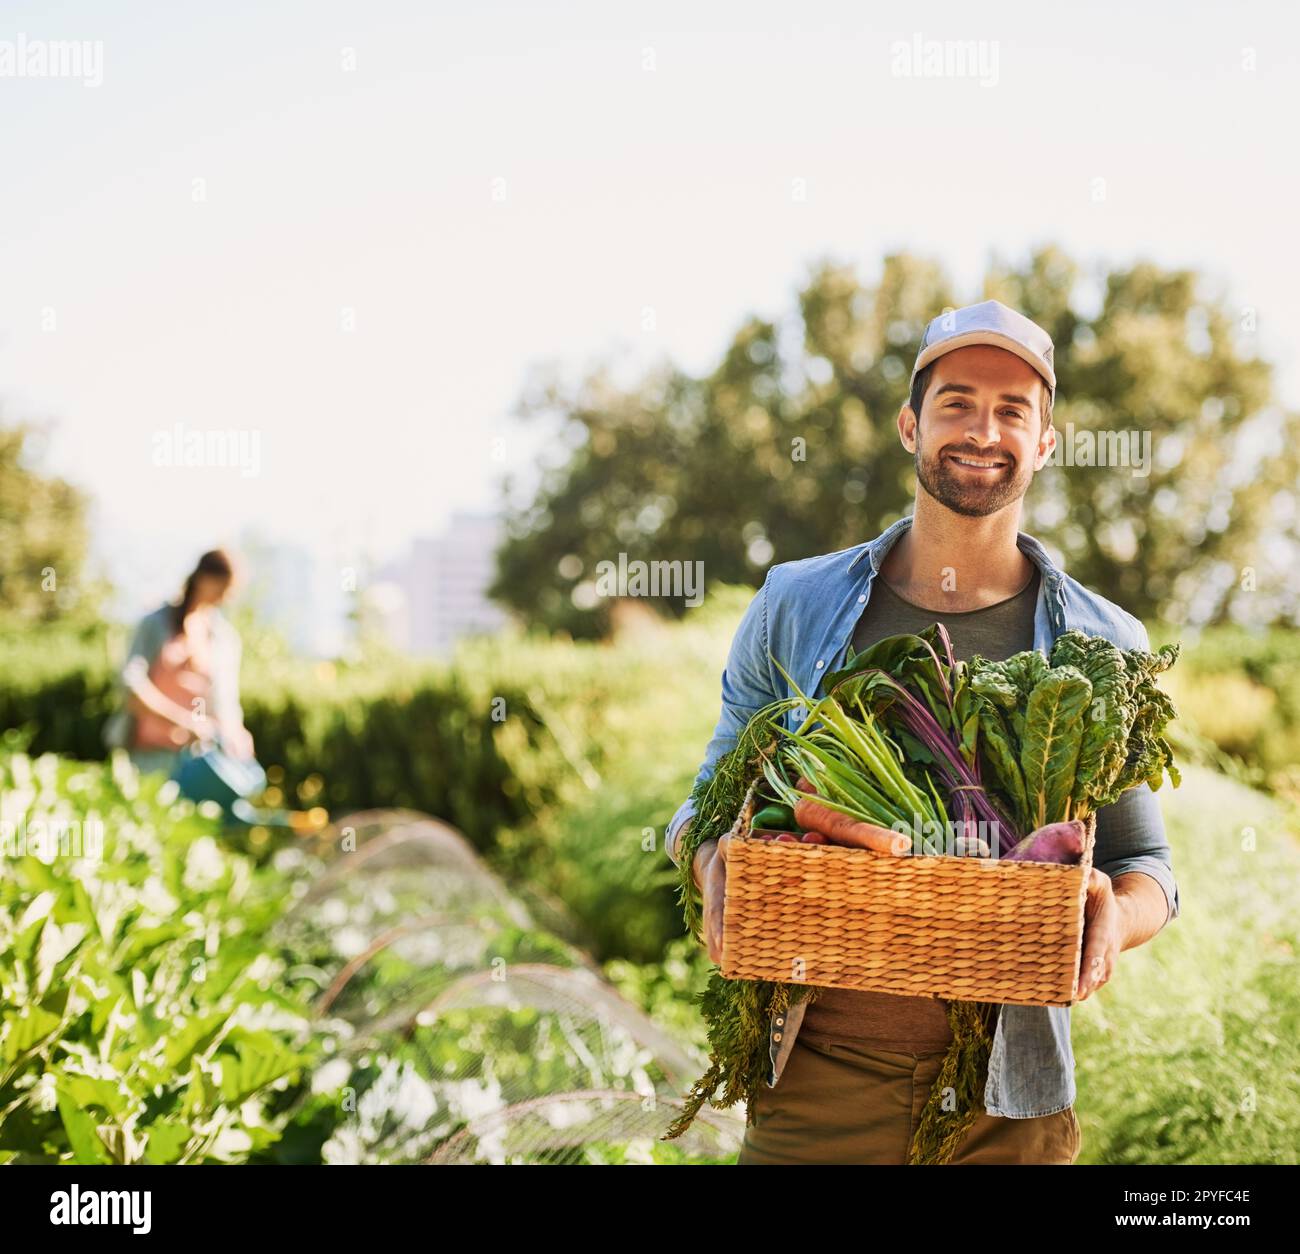 Delivering freshness to your dinner plate. Portrait of a happy young farmer harvesting herbs and vegetables in a basket on his farm. Stock Photo